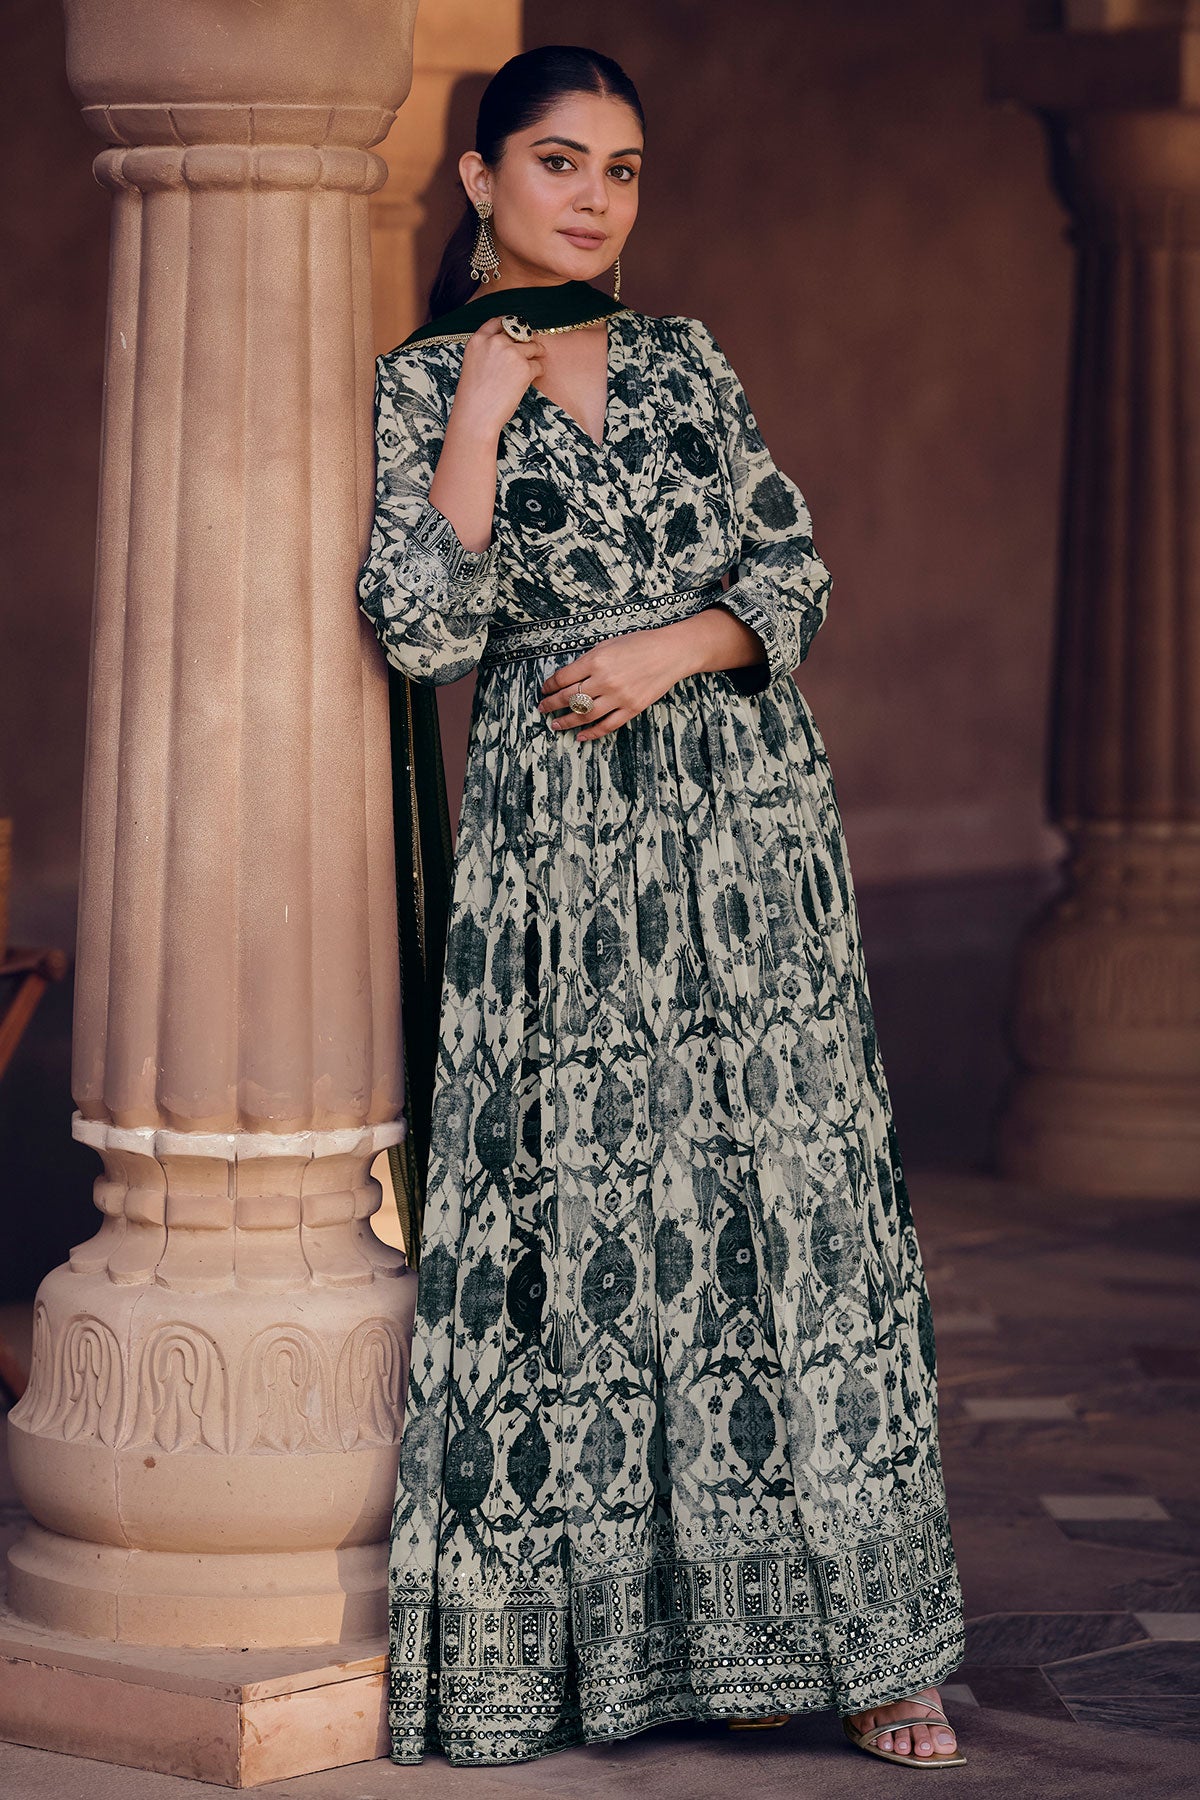 Black & White Floral Printed and Embroidered Anarkali Gown Dupatta Set